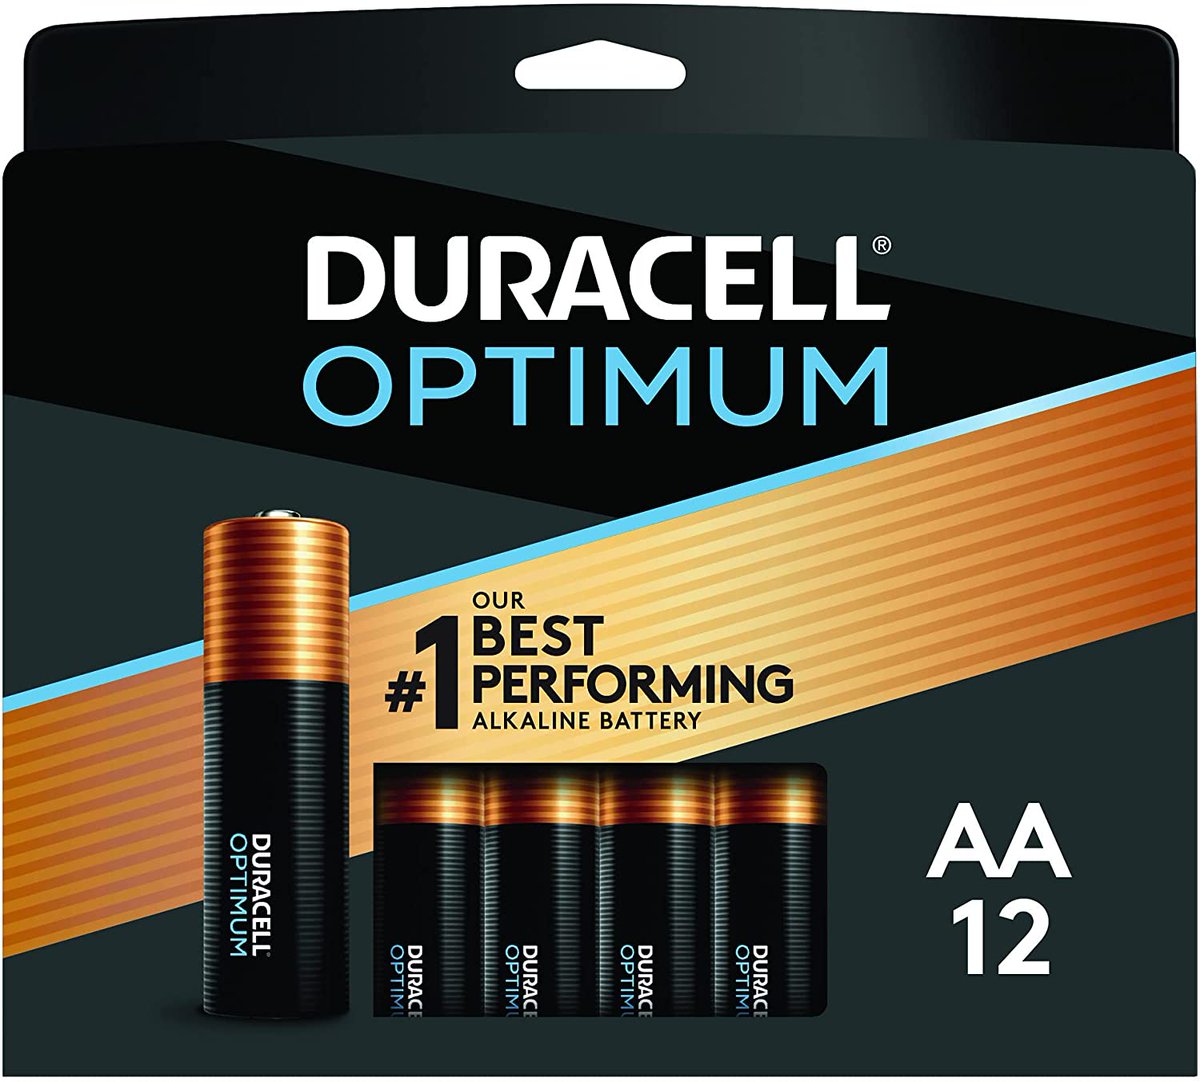 (12-Pack) Duracell Optimum 1.5V Alkaline AA Batteries with Resealable Package 

On sale starting as low as $8.51

https://t.co/cnOC9nzR1A

#ad #batteries https://t.co/jEhryPLpSE